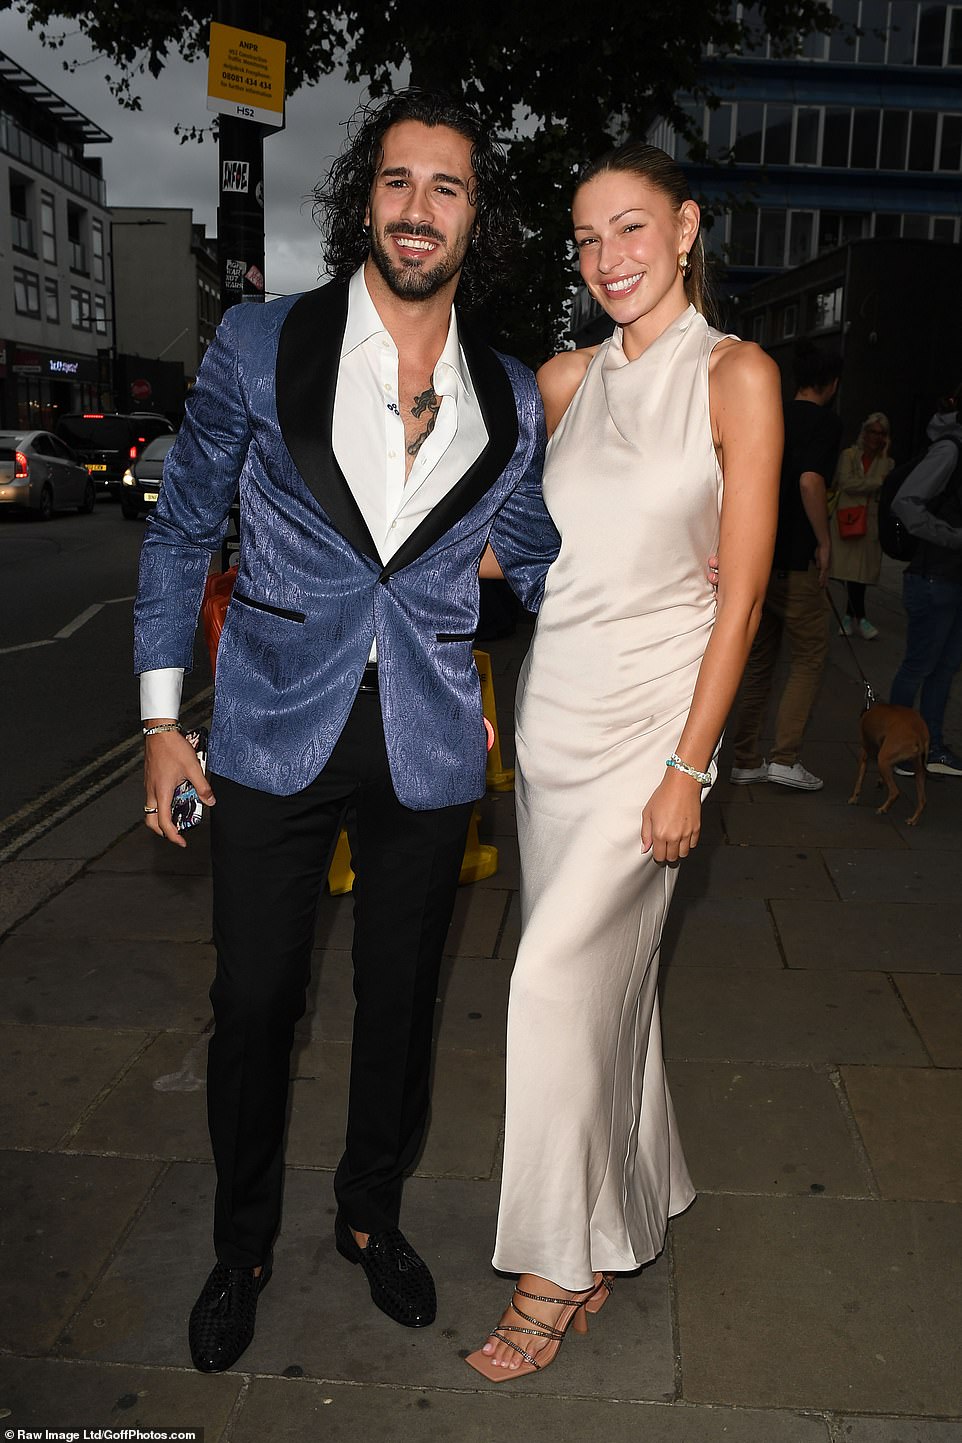 Twinkle-toed stars: Strictly Come Dancing professional Graziano Di Prima and his celebrity dance partner, former Love Island star Zara Mcdermott, posed arm-in-arm outside the venue